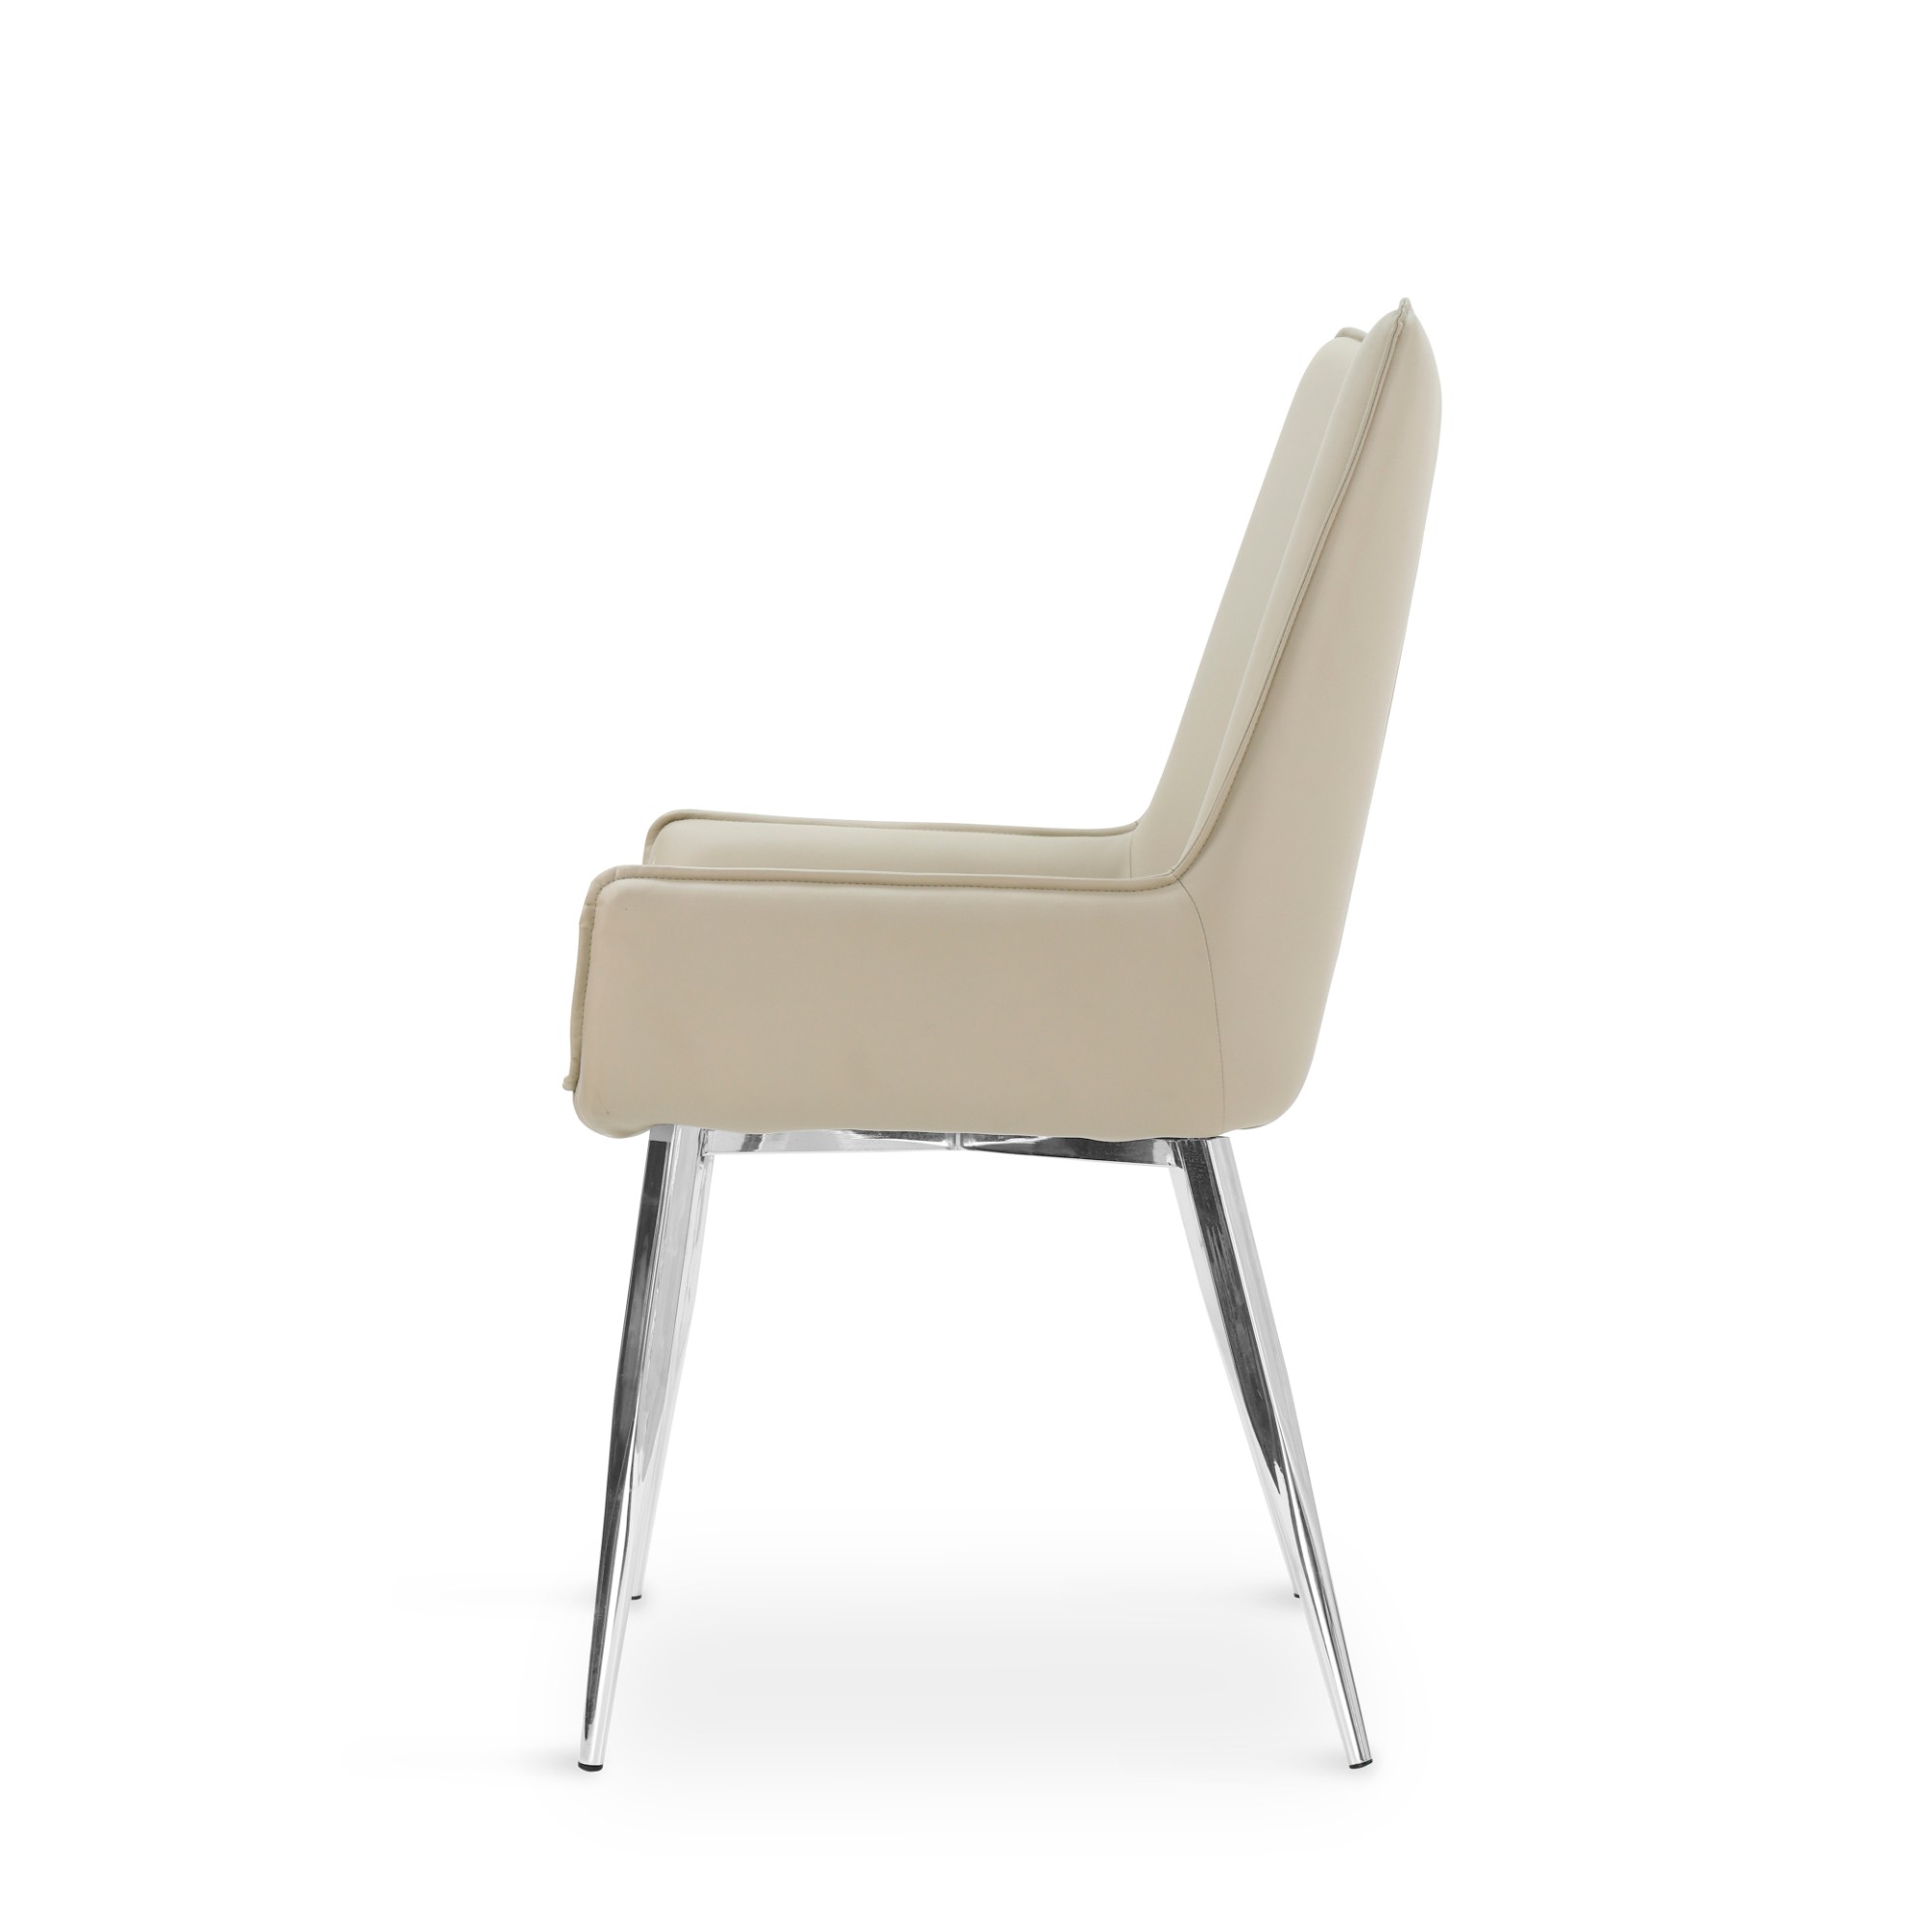 Beige PU Dining Chair with Chromed Legs for Dining Room